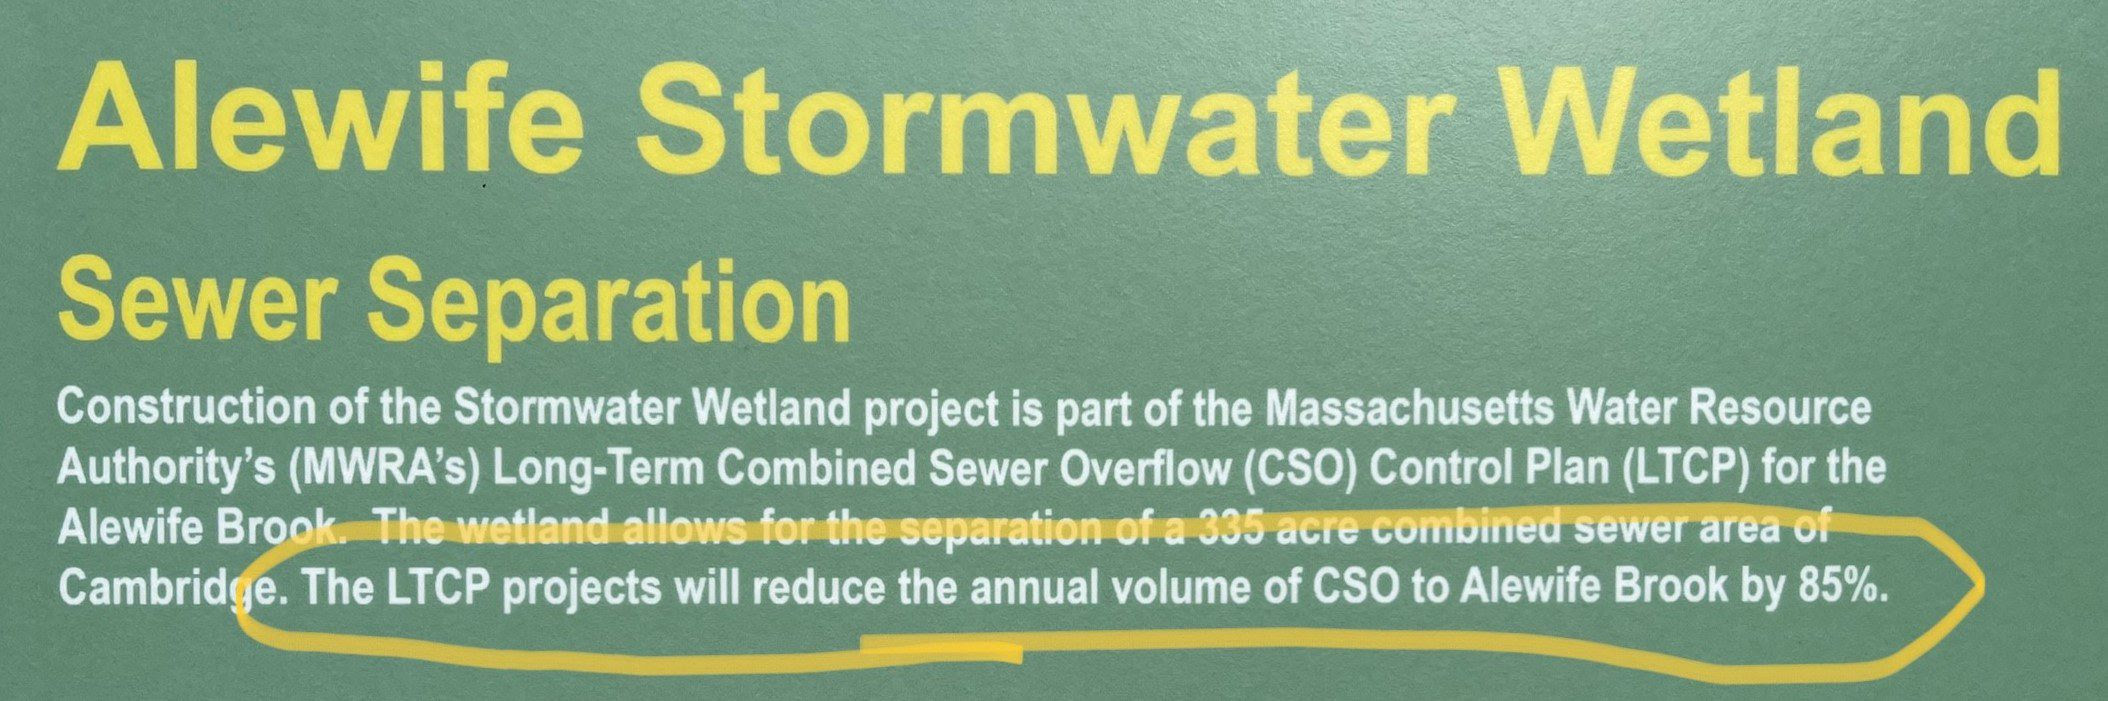 Close up of the kiosk sign at the Alewife Stormwater Wetland in Cambridge